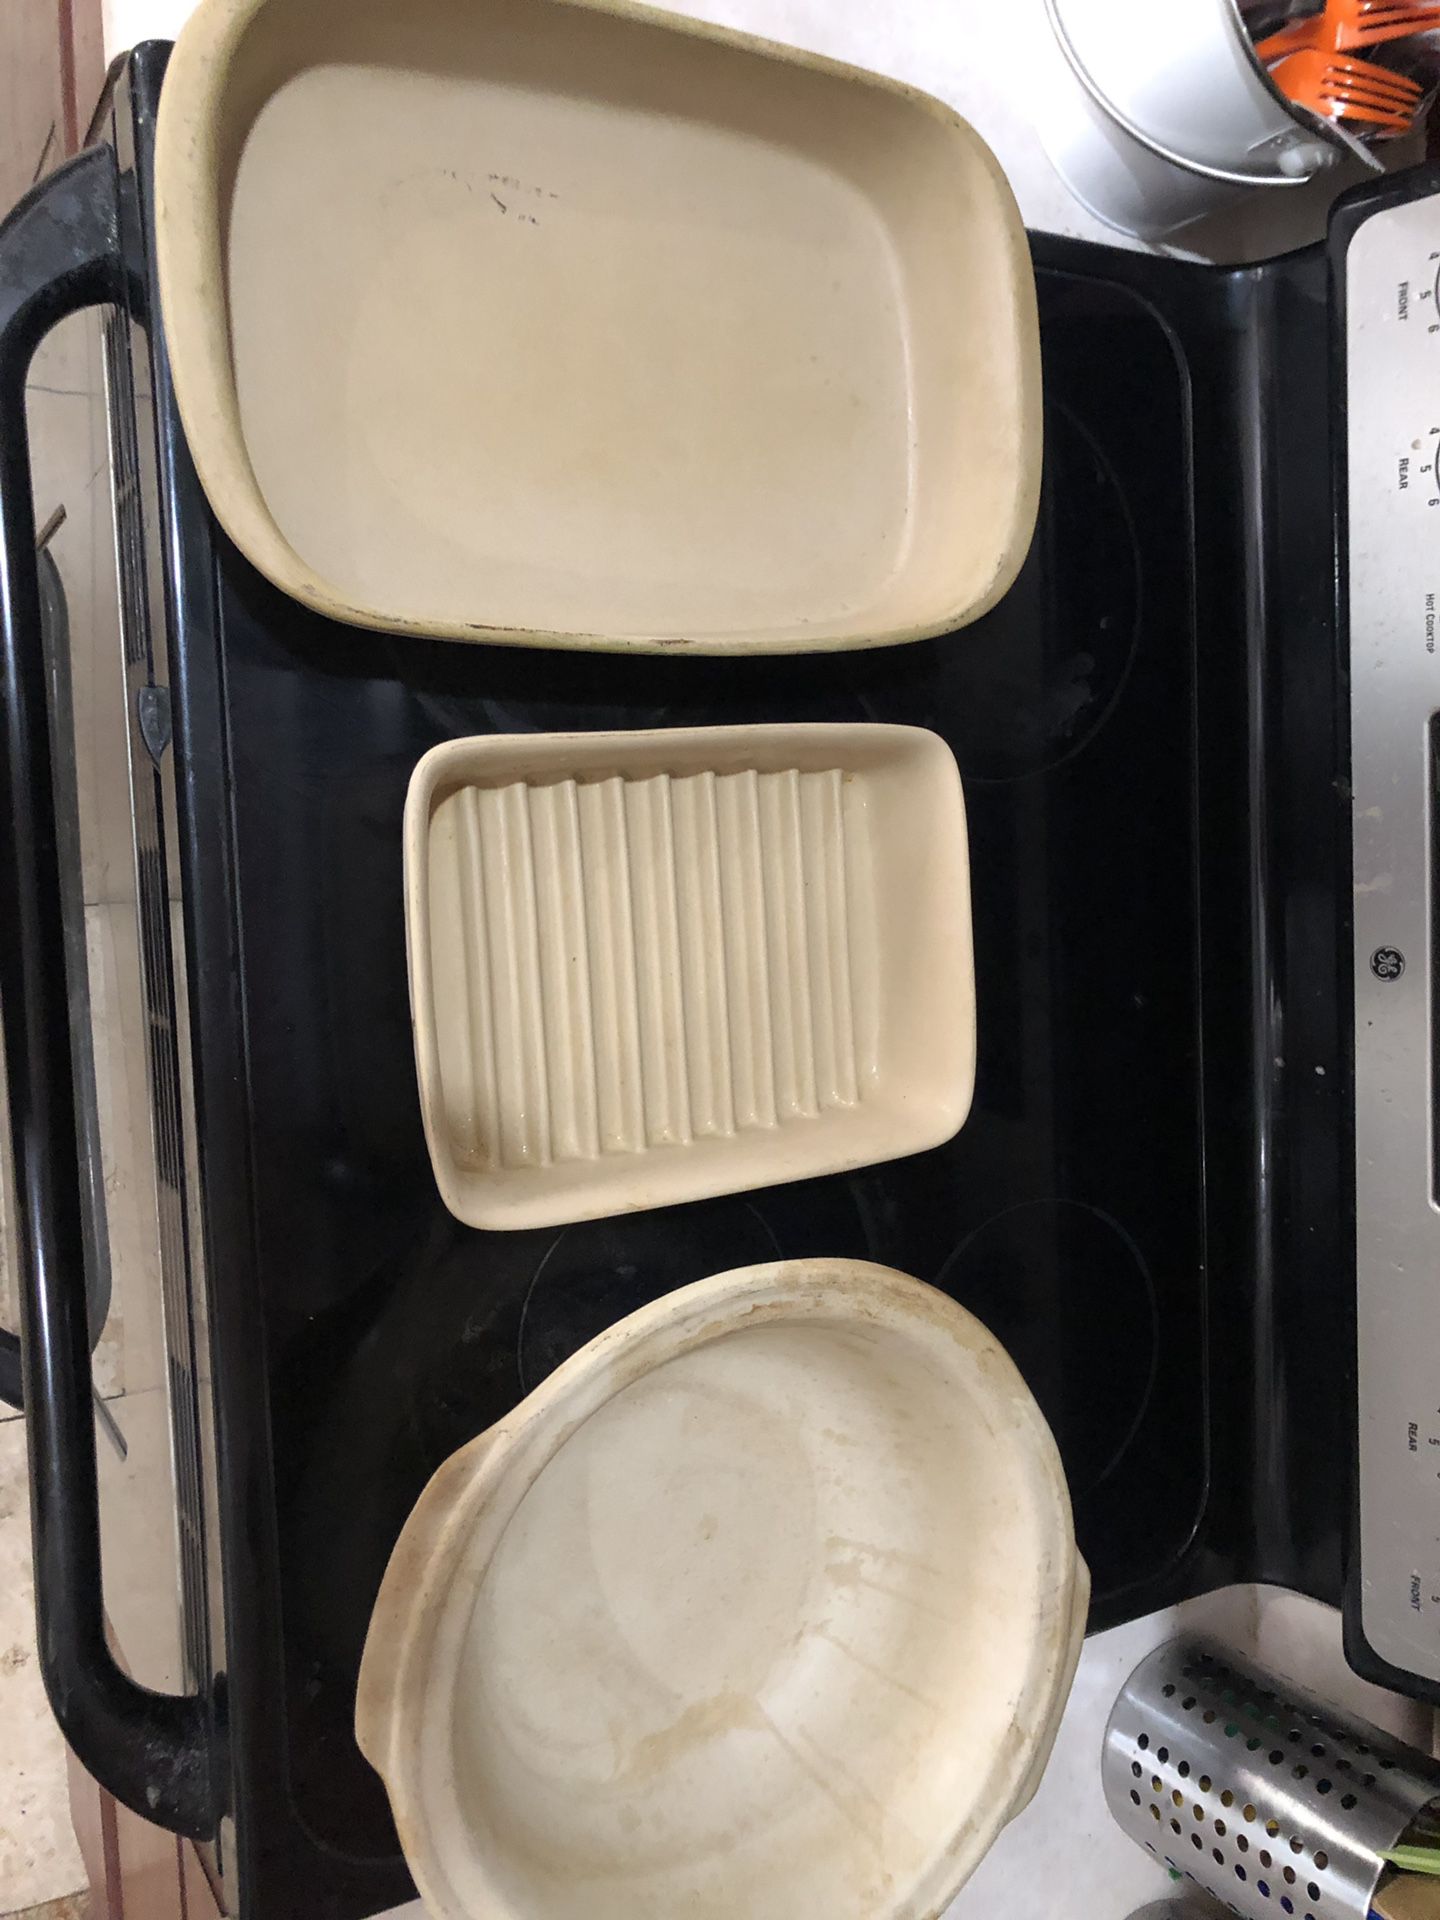 Stone cooking pans